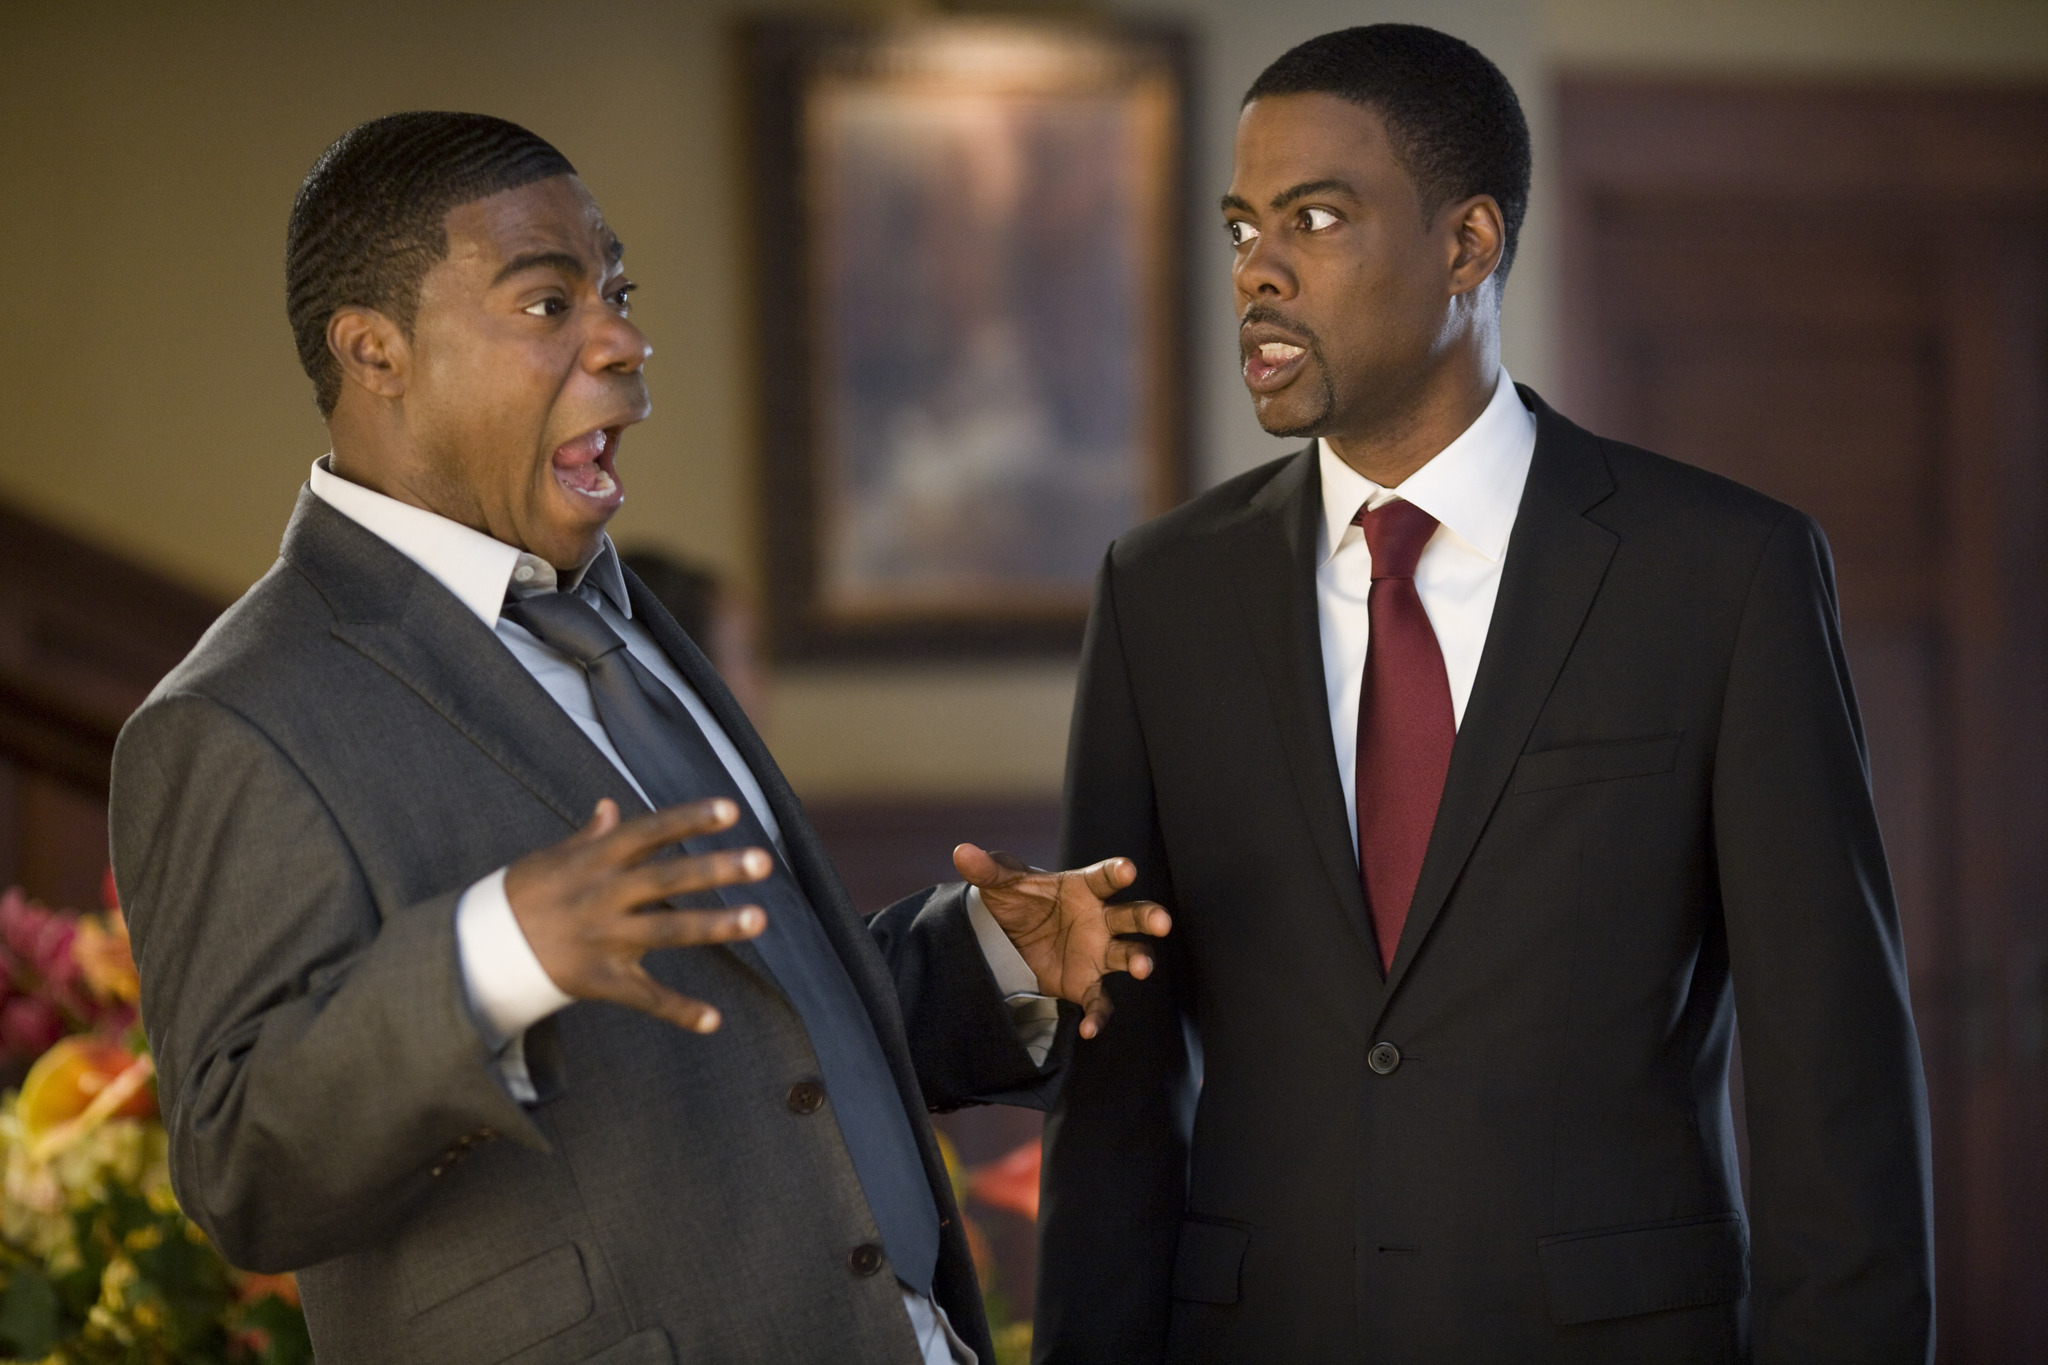 Still of Chris Rock and Tracy Morgan in Death at a Funeral (2010)